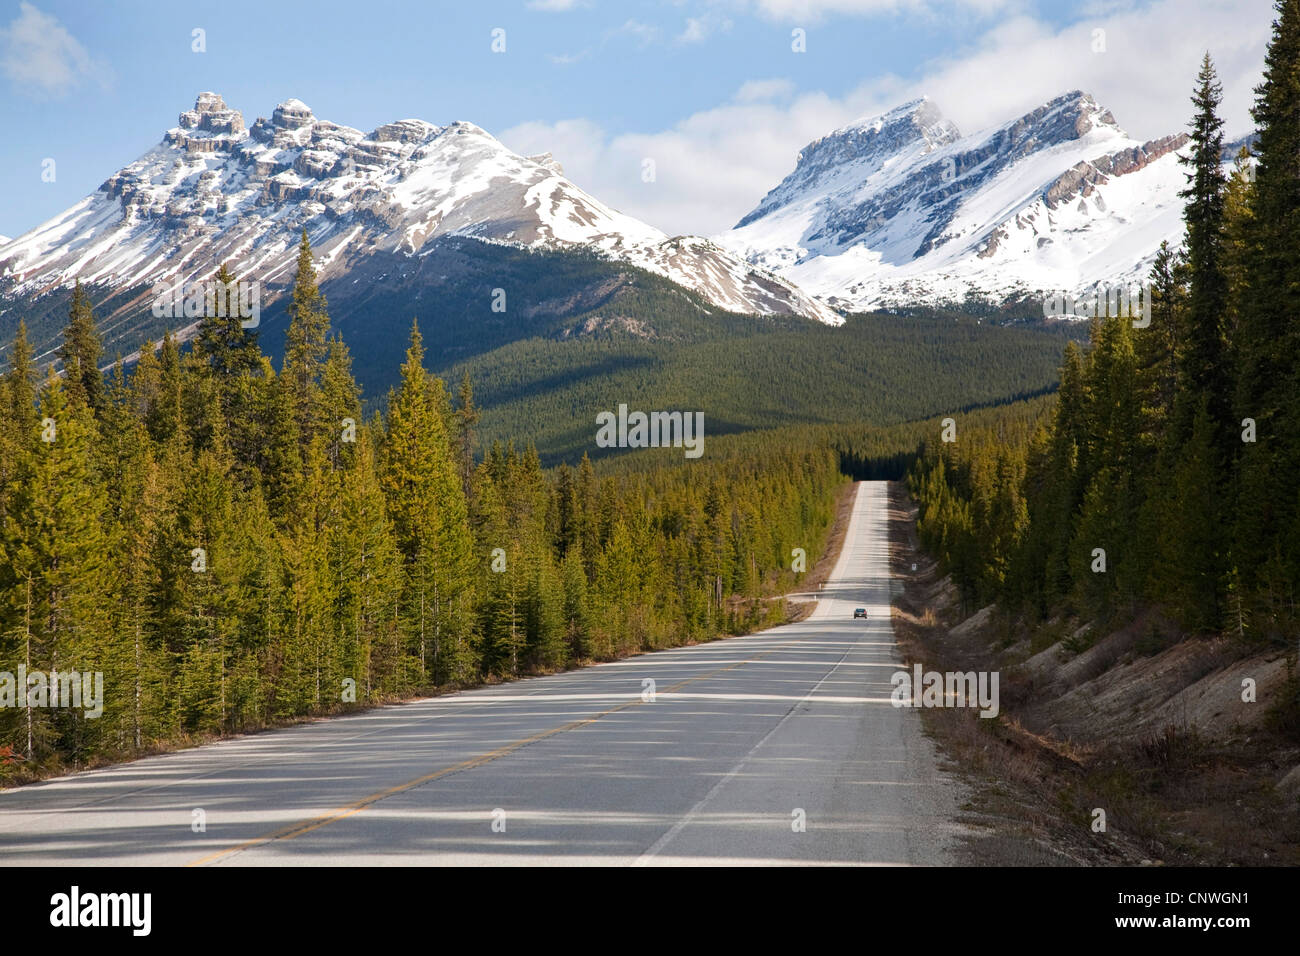 Icefields Parkway in mountain scenery, Canada, Alberta, Banff National Park Stock Photo